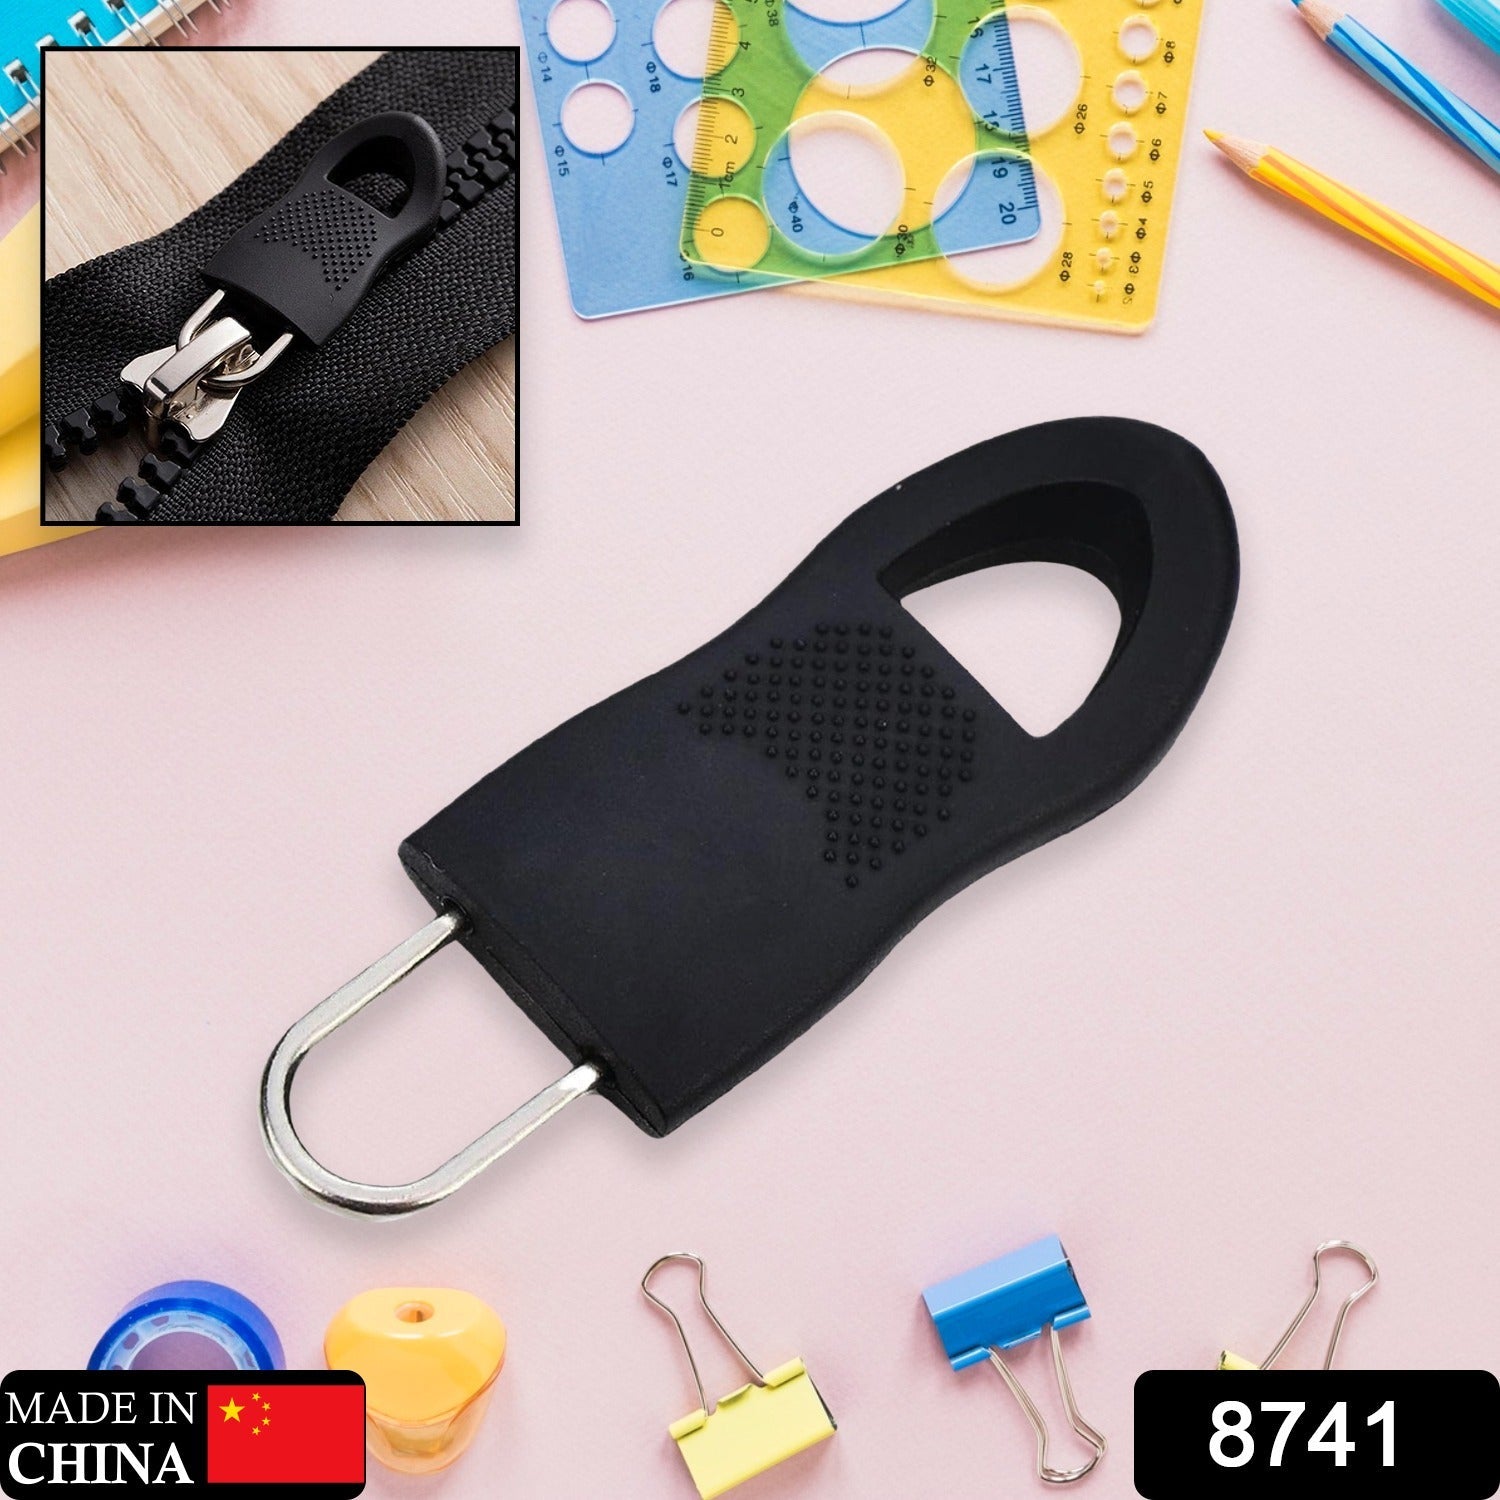 Zipper Pull Tab Zipper Tags Cord Pulls Zipper Extension Zip Fixer for Luggage Suitcase Backpack Jacket Bags Style Metal Zipper Head Zip Fixer Tags Handbag Backpack Plastic (1 Pc / 10 Pc)